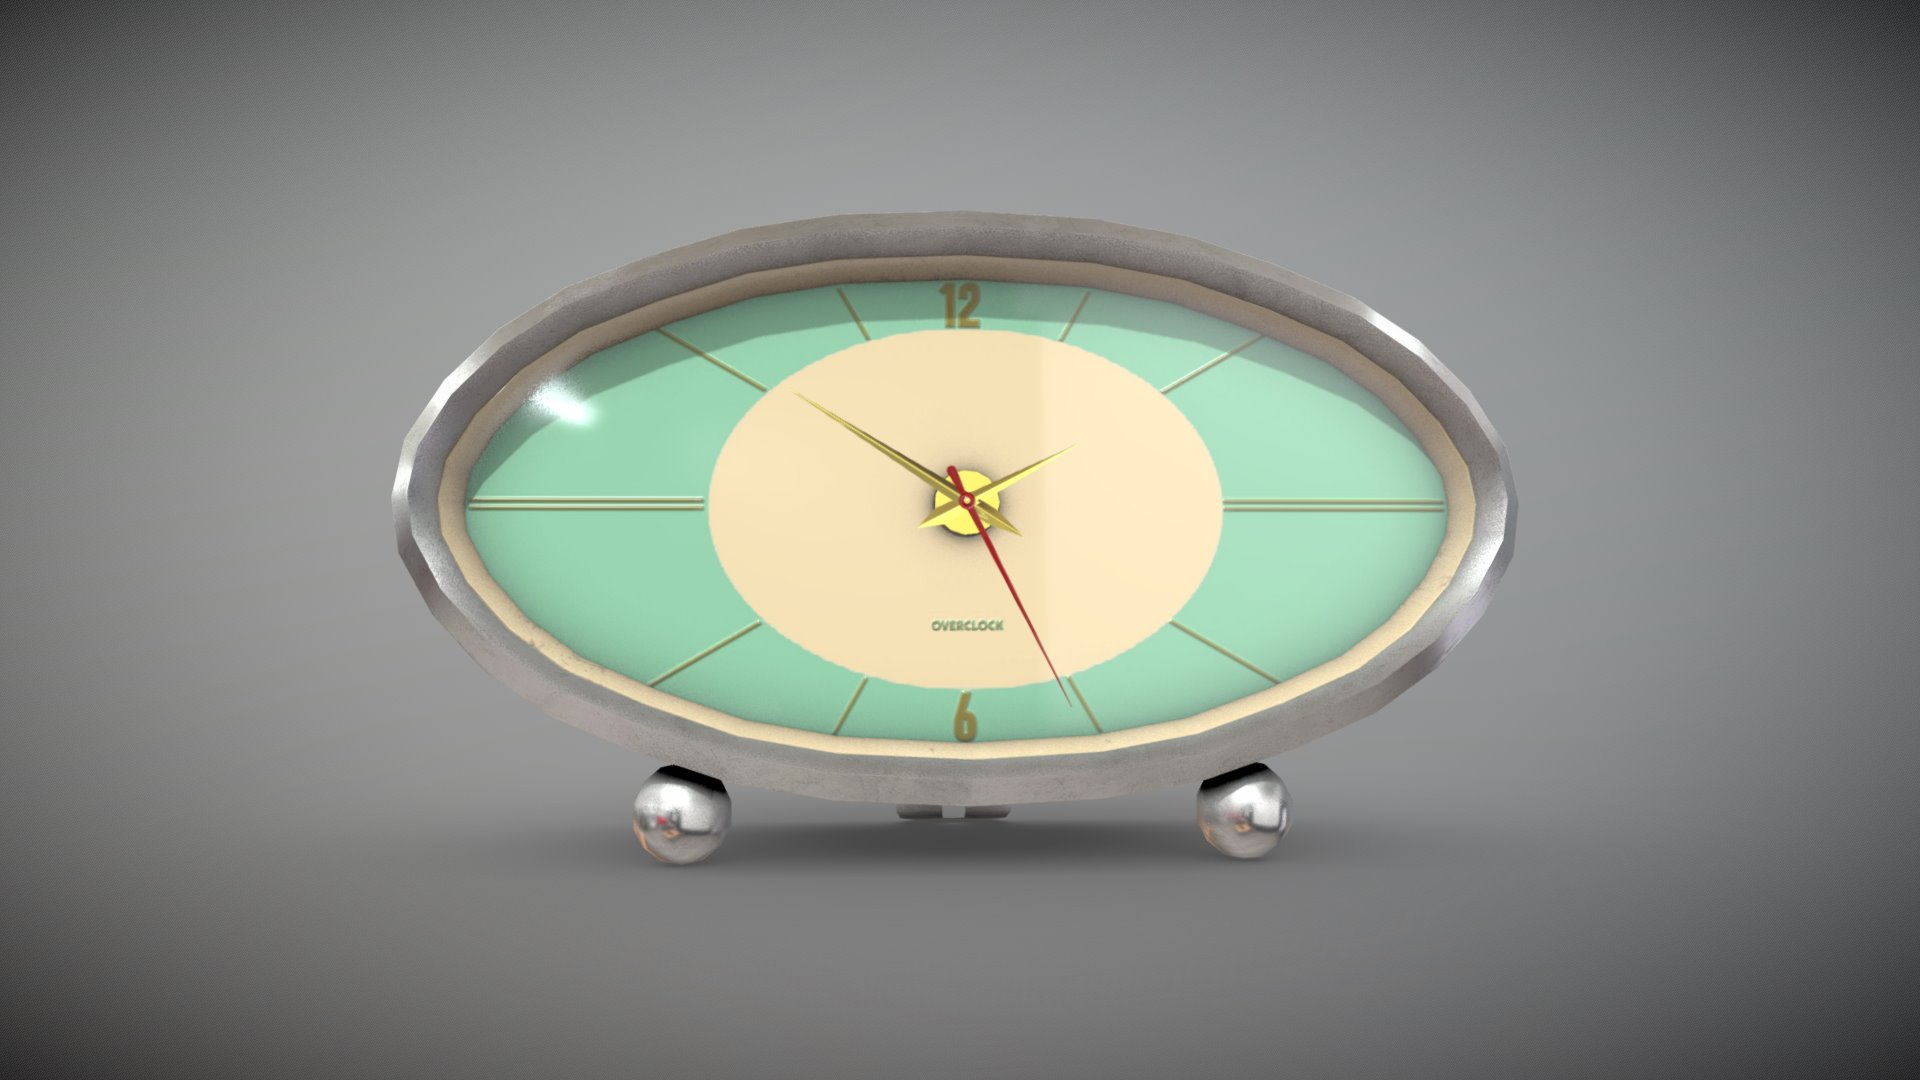 3D model Desktop clock 7 of 20 - This is a 3D model of the Desktop clock 7 of 20. The 3D model is about a round clock with a black face.